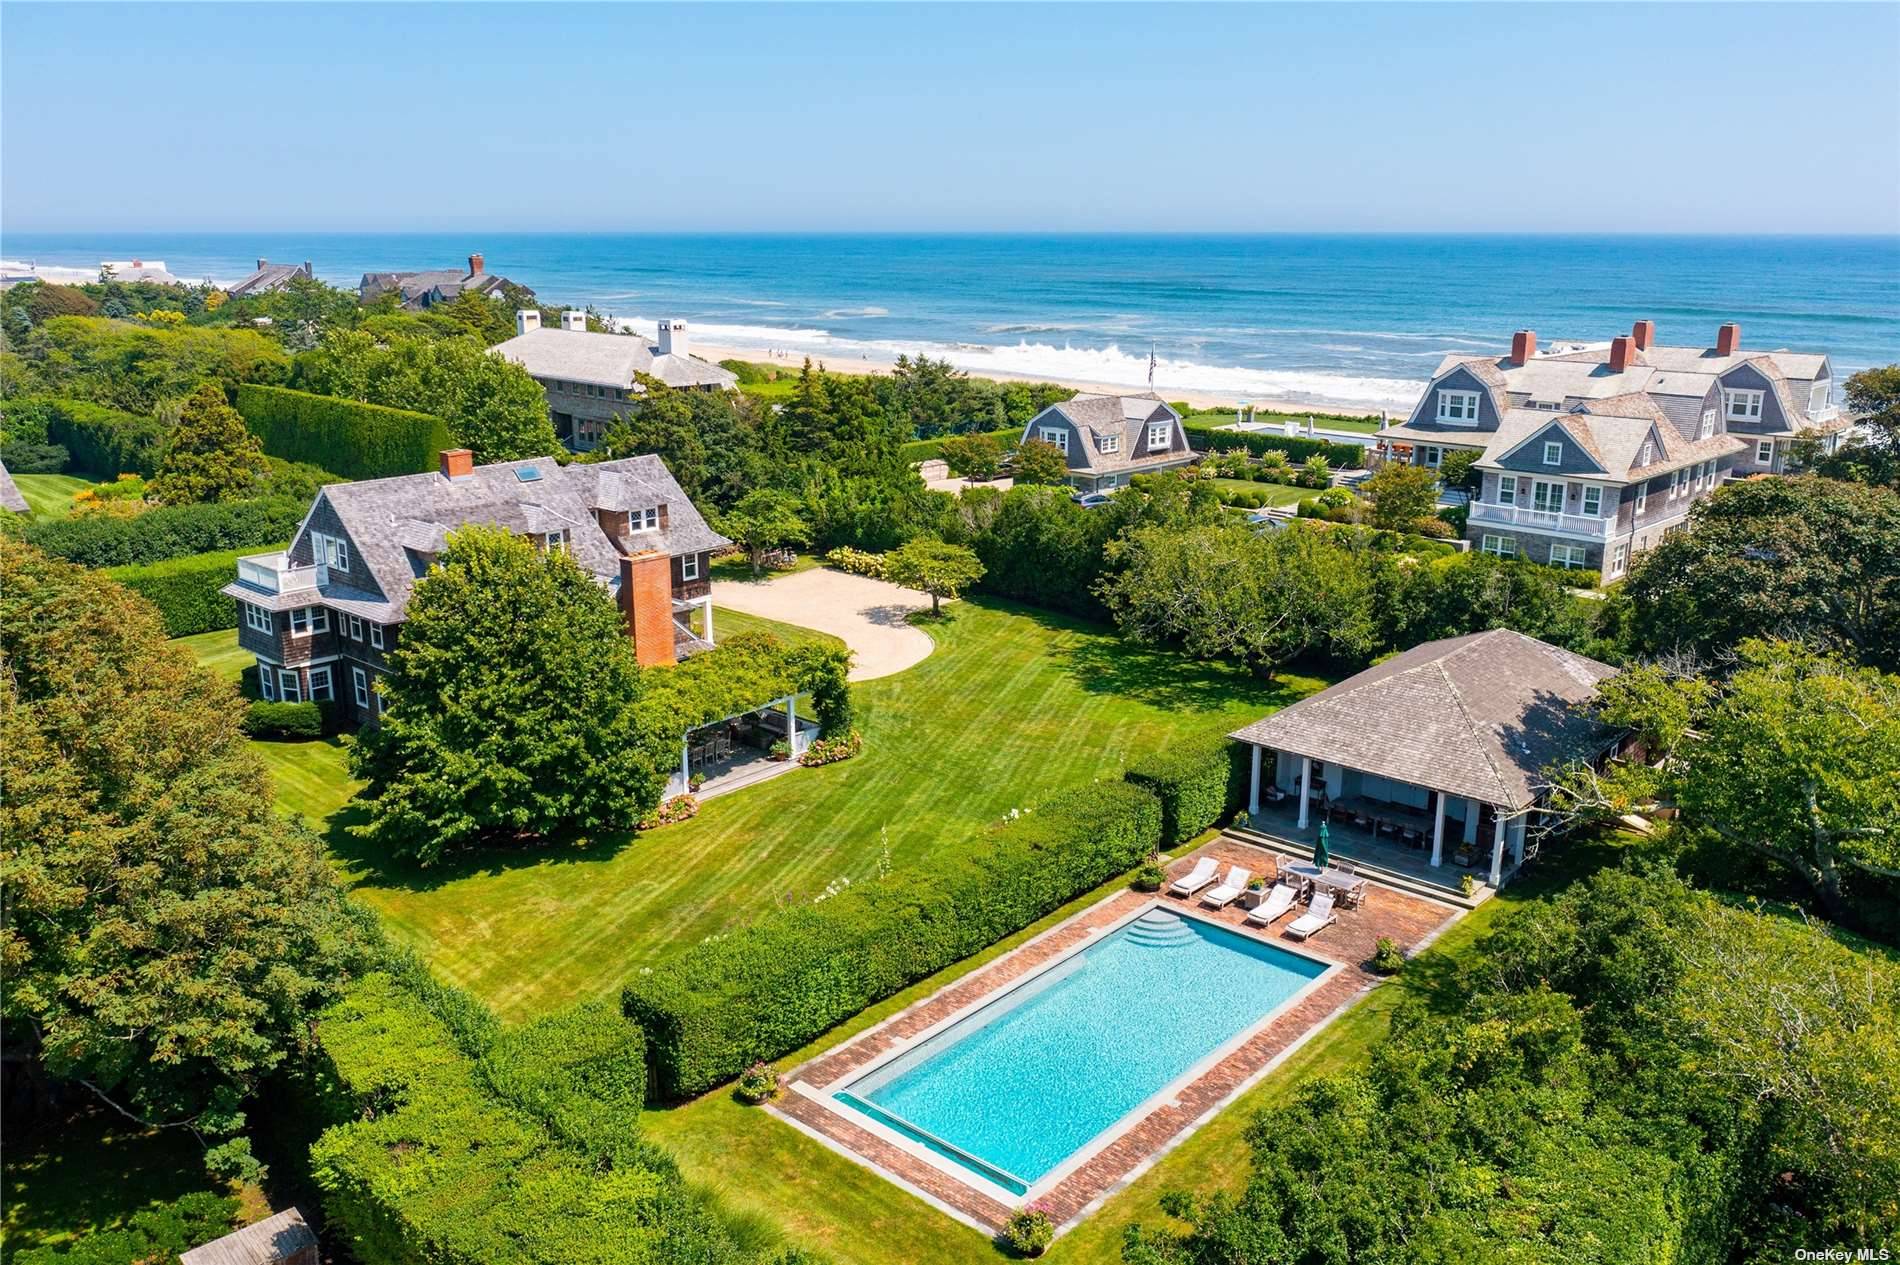 OCEAN BREEZES Timeless East Hampton Estate has been recently renovated with old world charm, style, and a true Hampton flare.